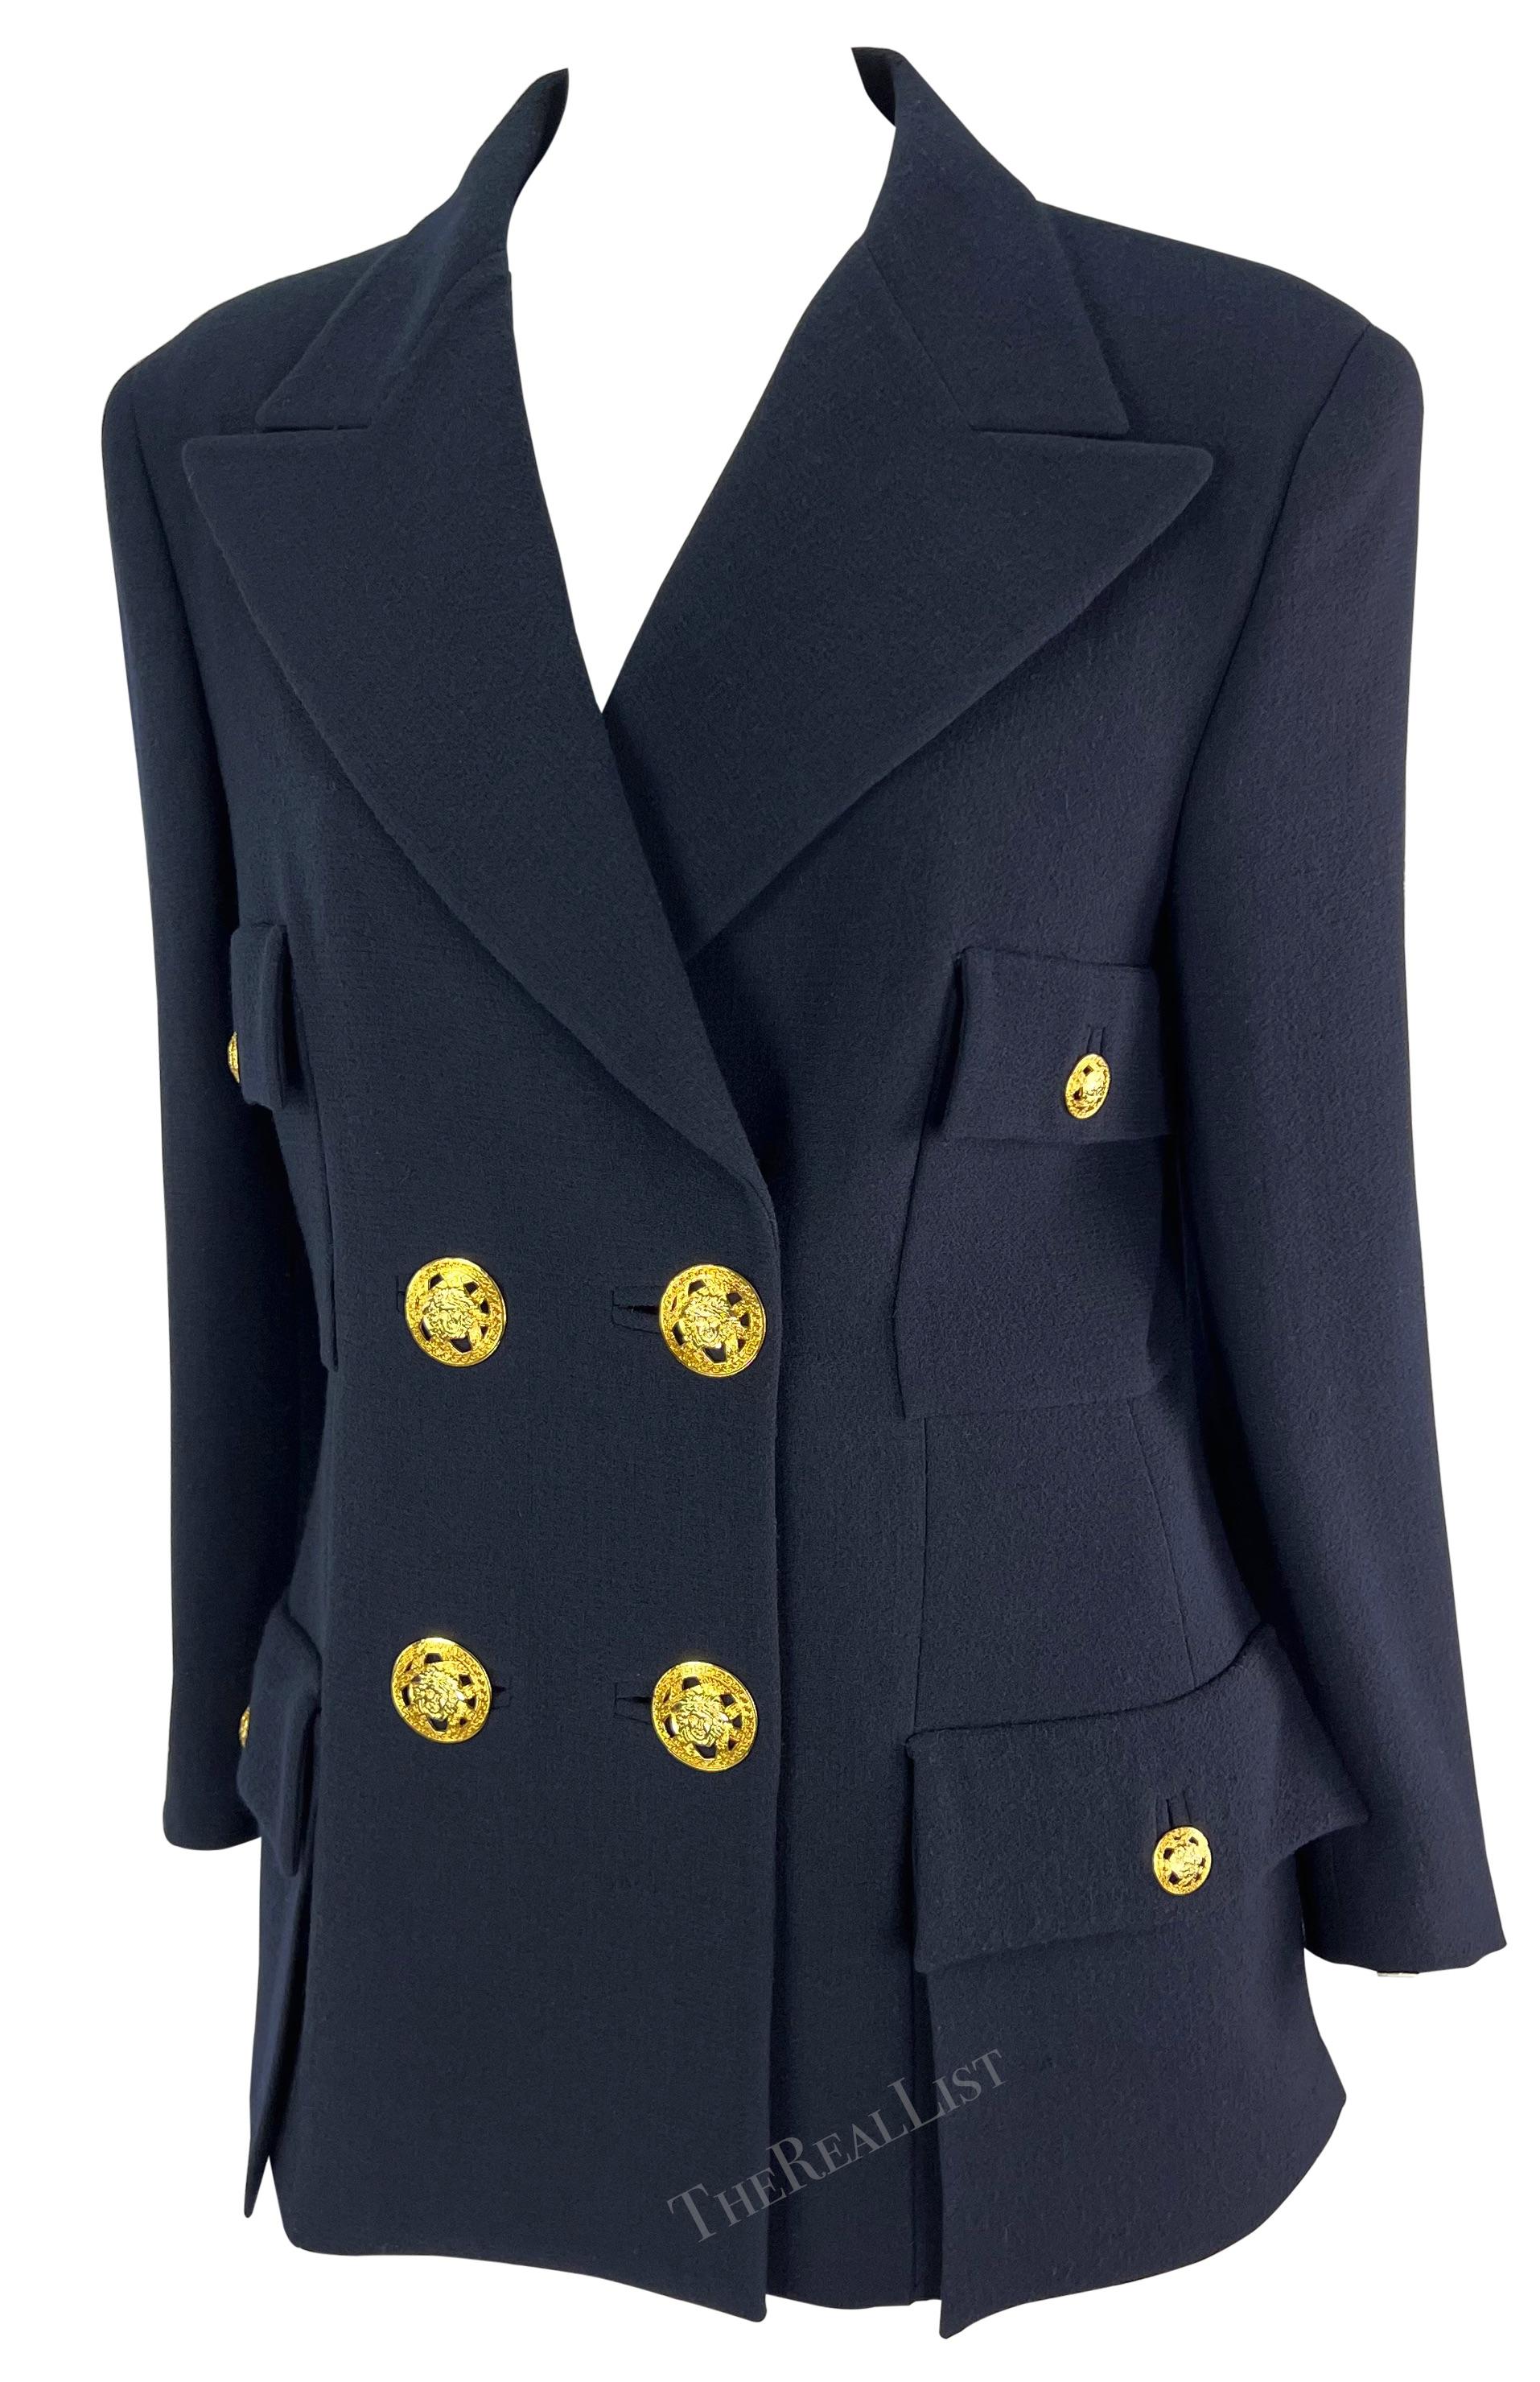 Women's S/S 1995 Gianni Versace Runway Ad Navy Double Breasted Medusa Blazer For Sale